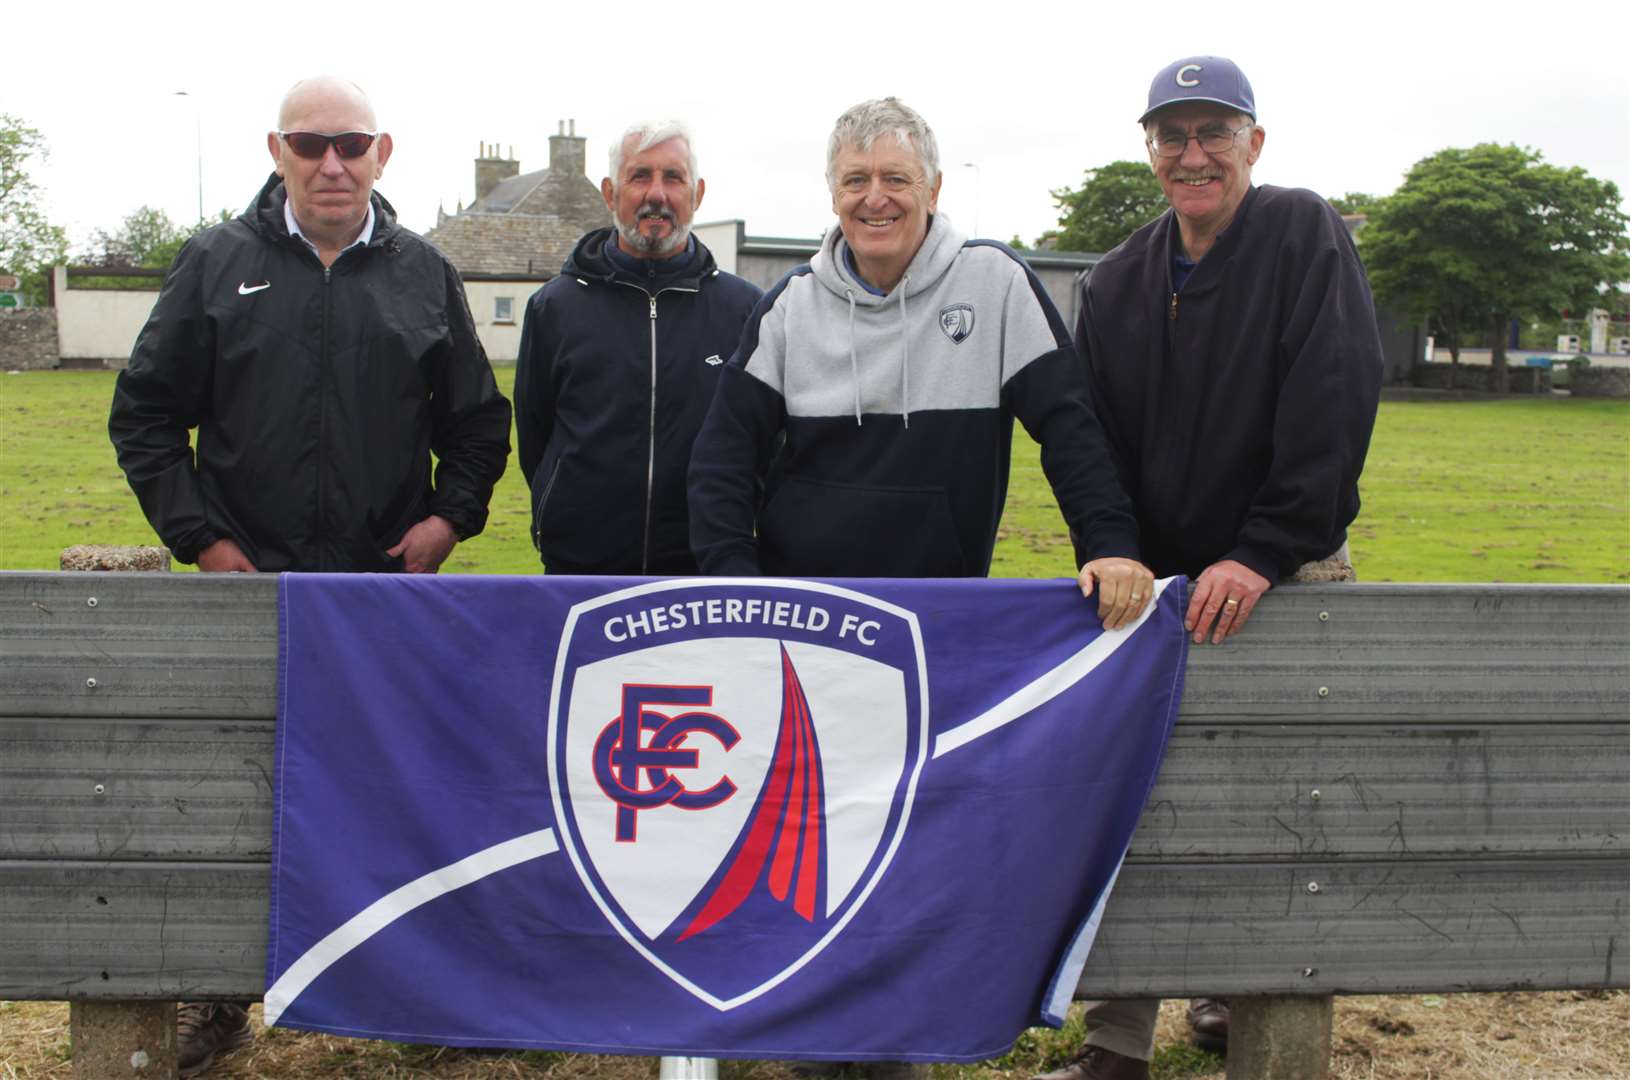 The supporters at the Dammies with their Chesterfield FC flag – (from left) Bruce Baskerville, Phil Smith, Chris Roberts and John Taylor. Picture: Alan Hendry